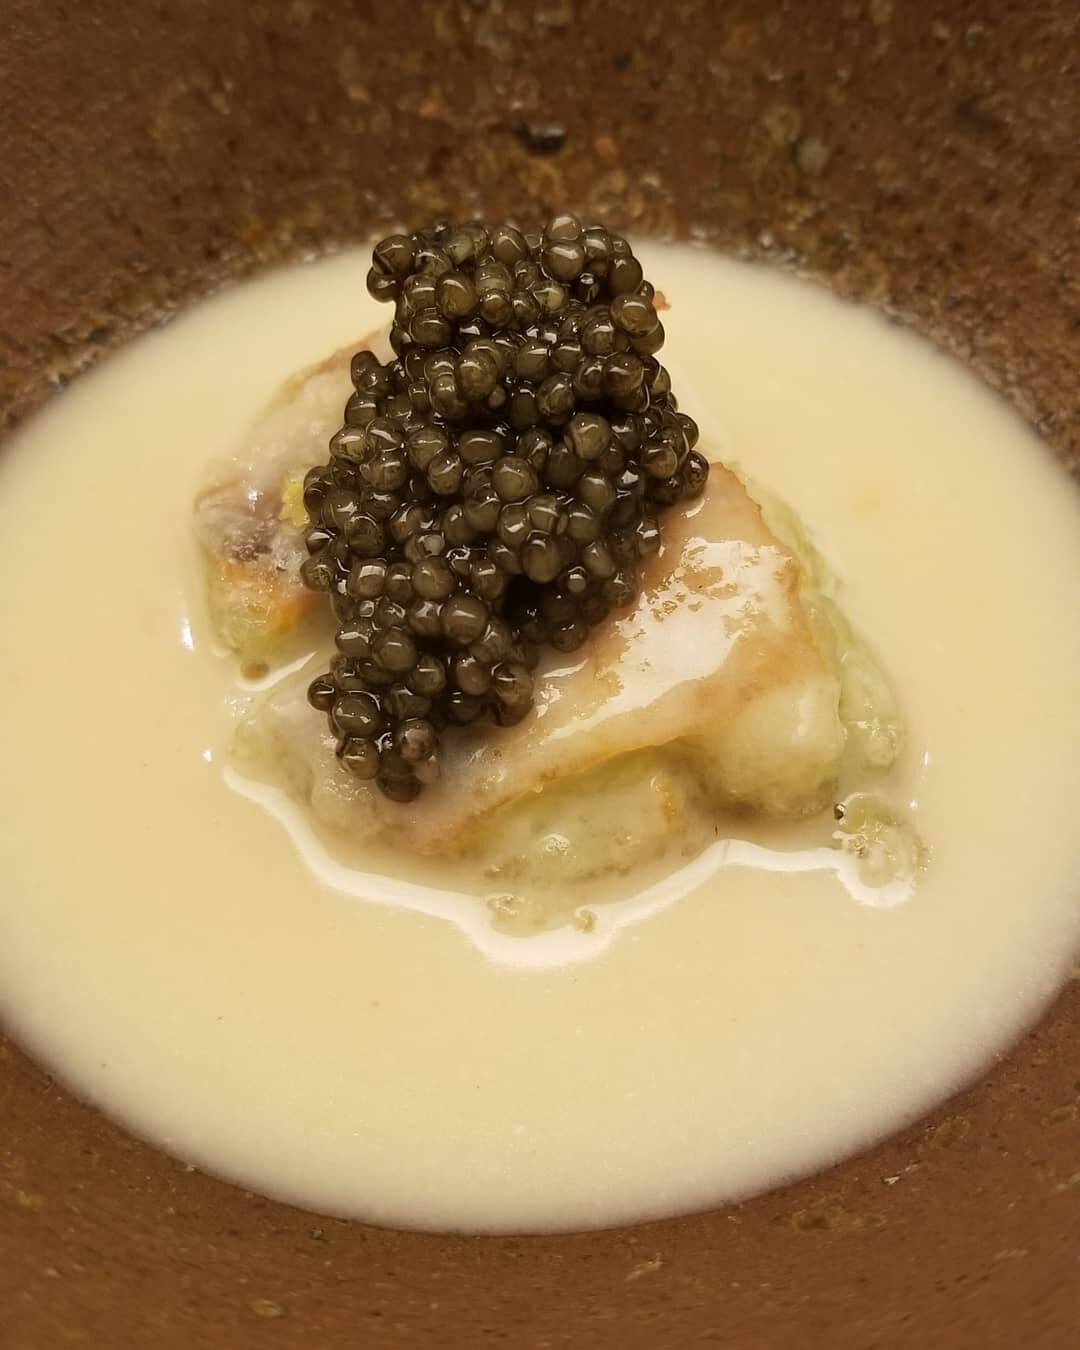 Deep fried blue crab served with chowder and topped with caviar